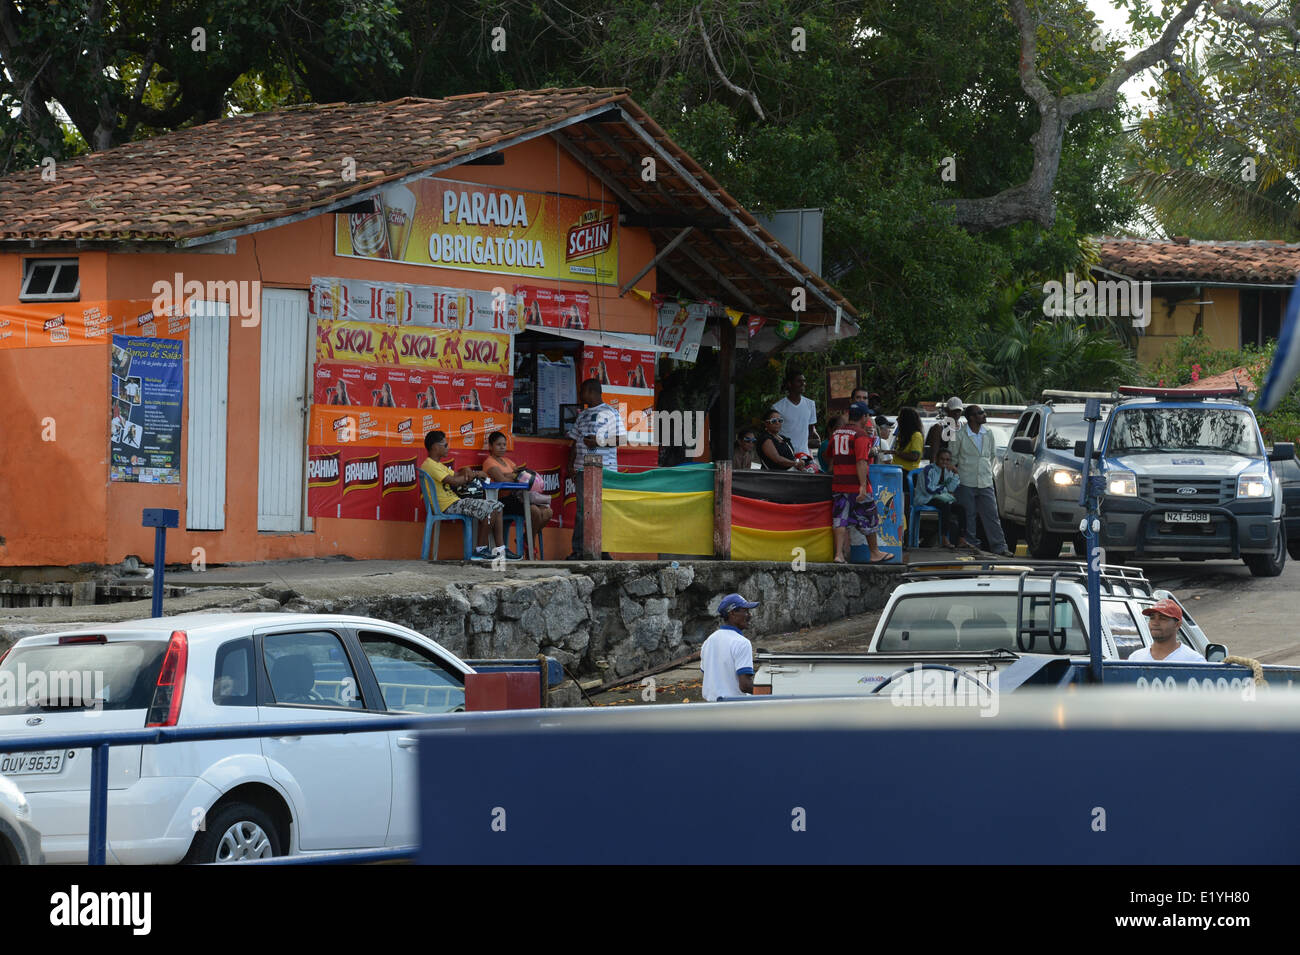 Cars leave the ferry in Santo Andre, Brazil, 11 June 2014. The FIFA World Cup will take place in Brazil from 12 June to 13 July 2014. Photo: Marcus Brandt/dpa Stock Photo